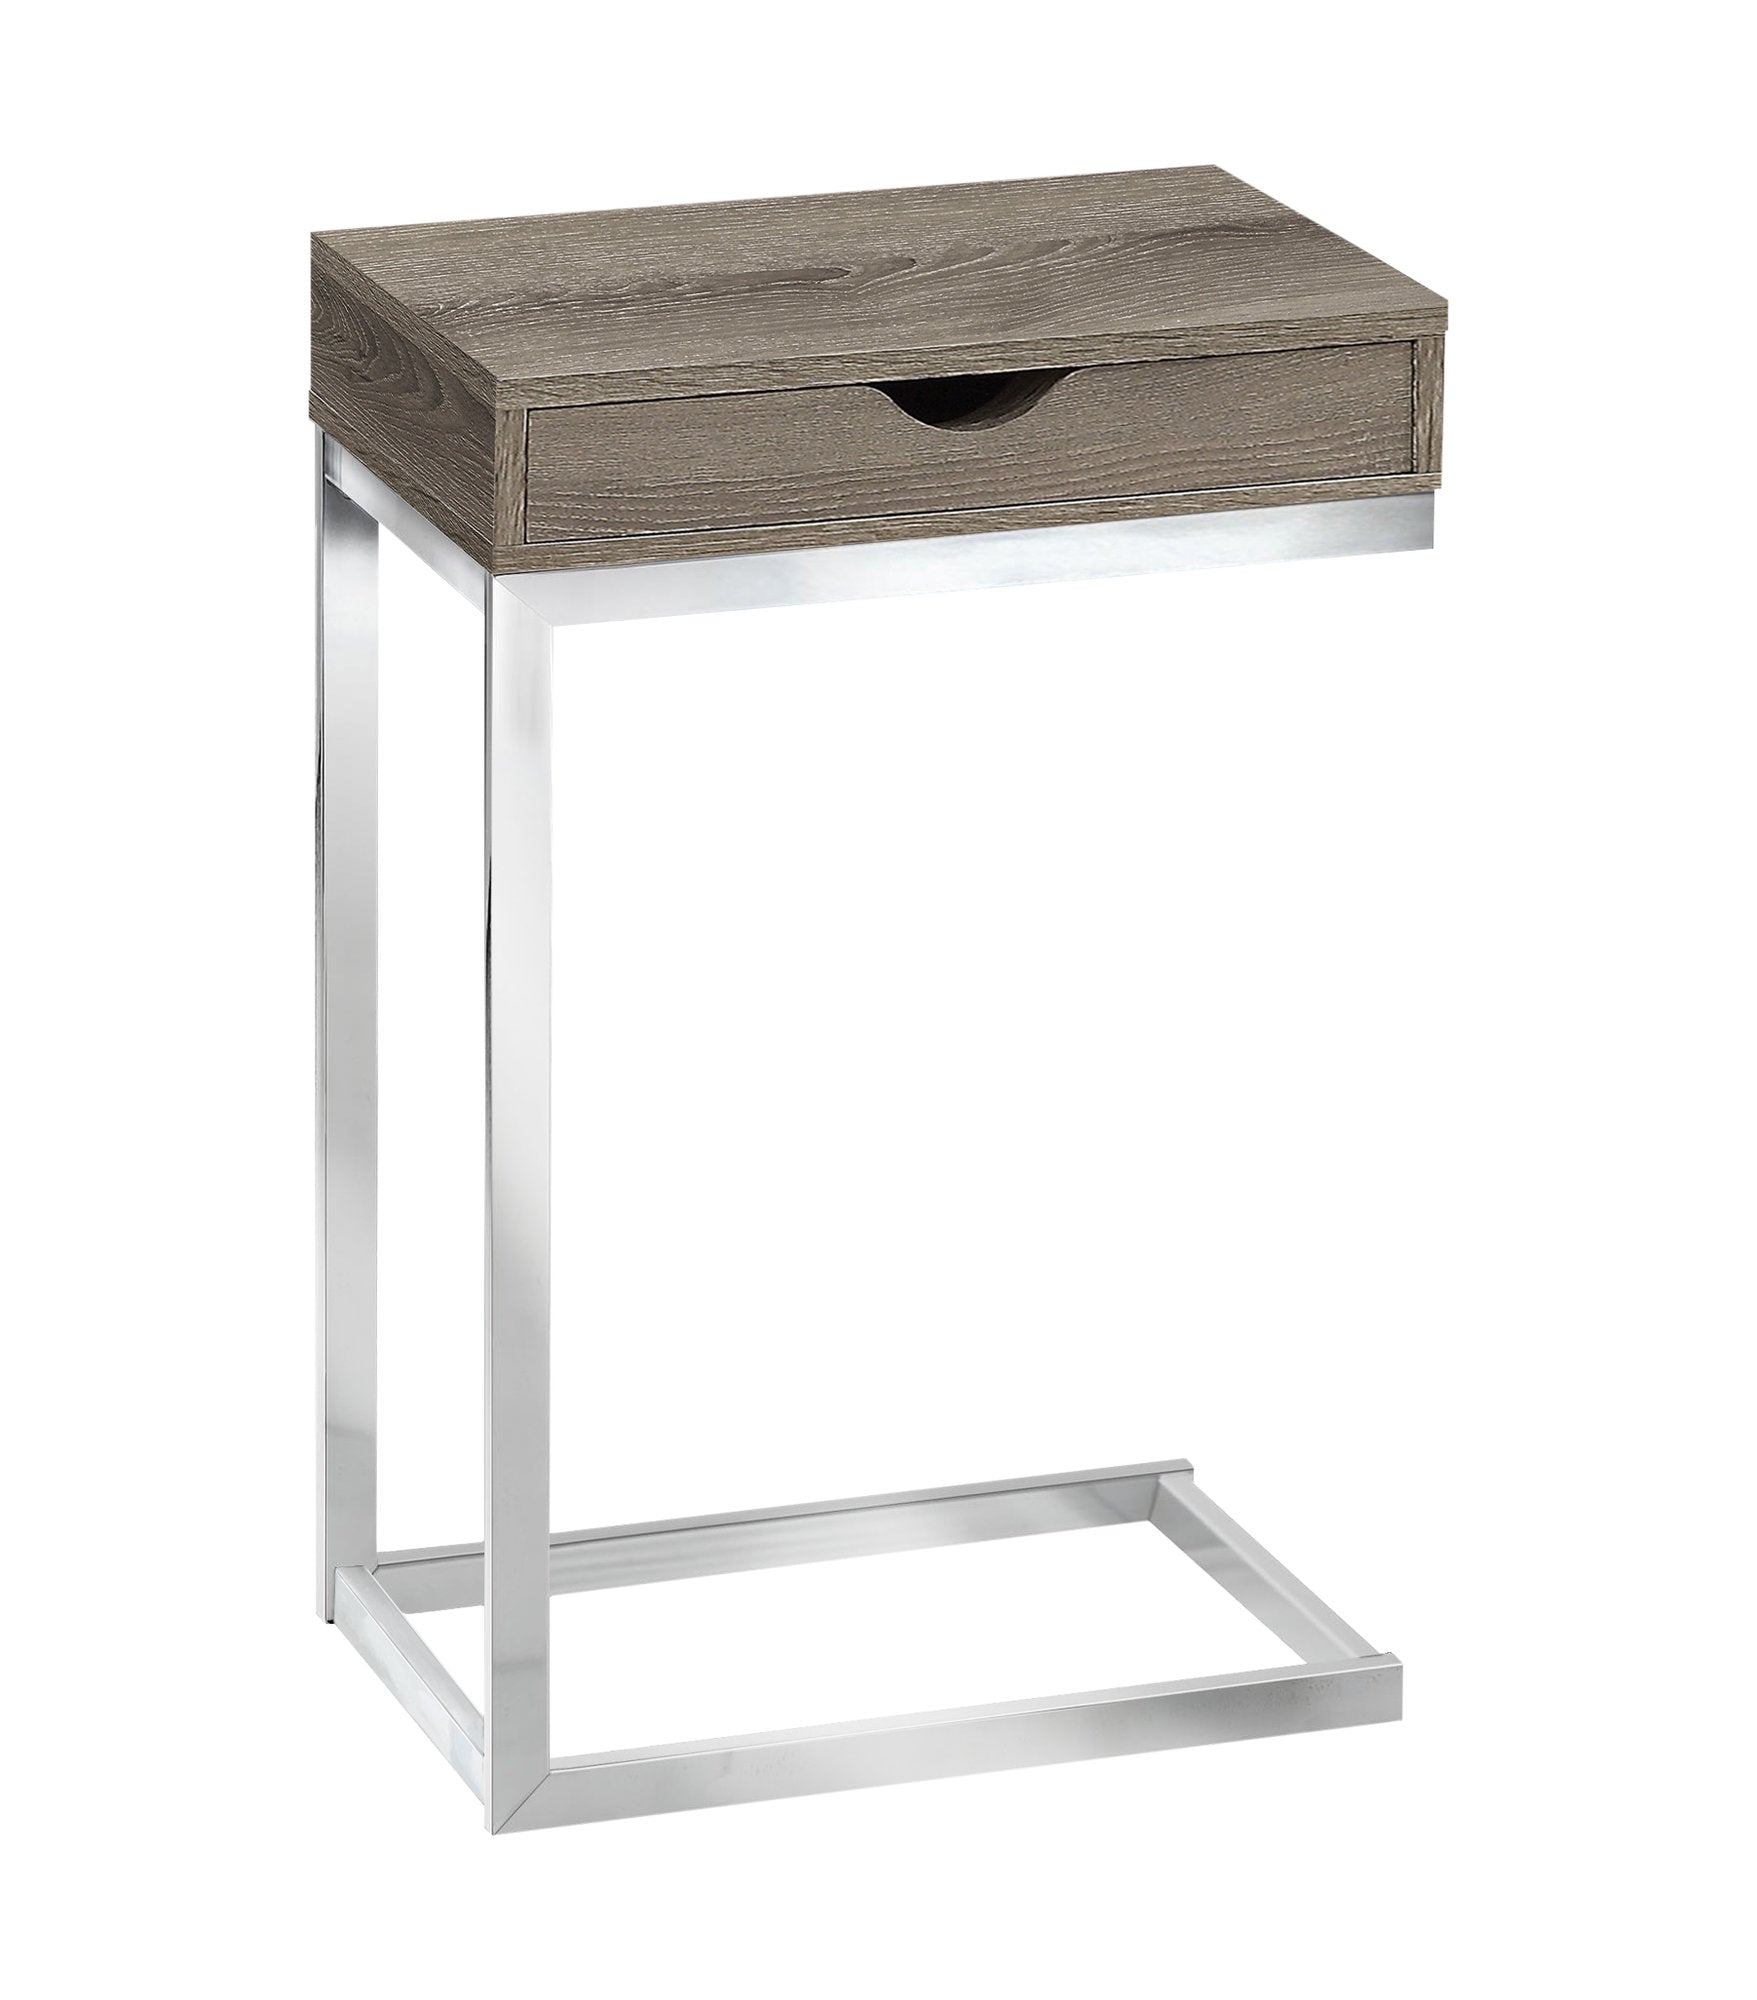 MN-903254    Accent Table, C-Shaped, End, Side, Snack, Living Room, Bedroom, Storage Drawer, Metal Legs, Laminate, Dark Taupe, Chrome, Contemporary, Modern